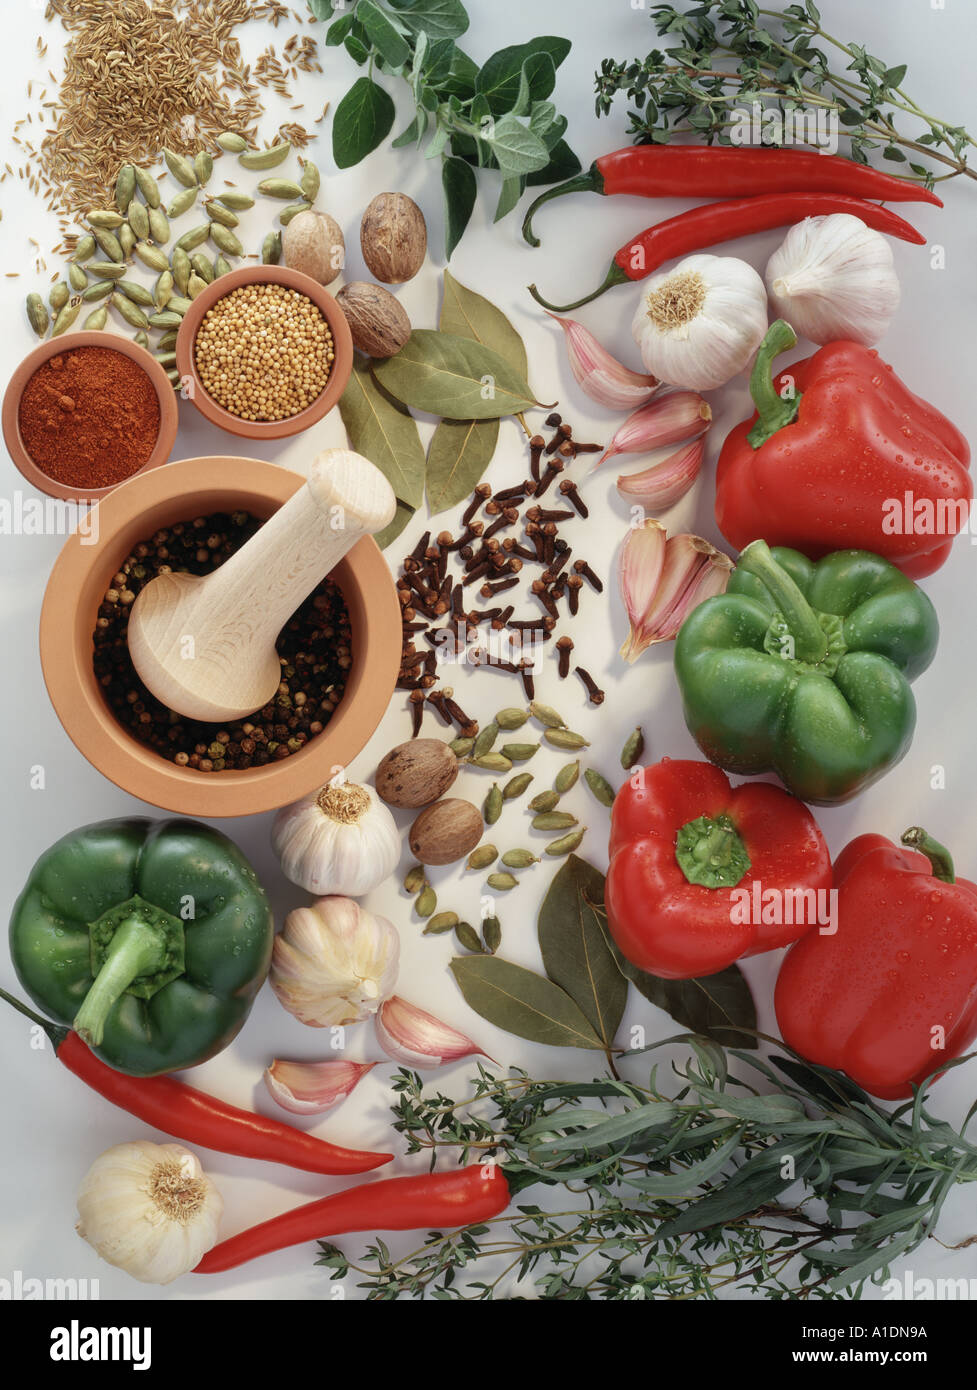 Still life of herbs spices and peppers Shot overhead on a white background and dappled lighting Original shot on 5x4 trans Stock Photo